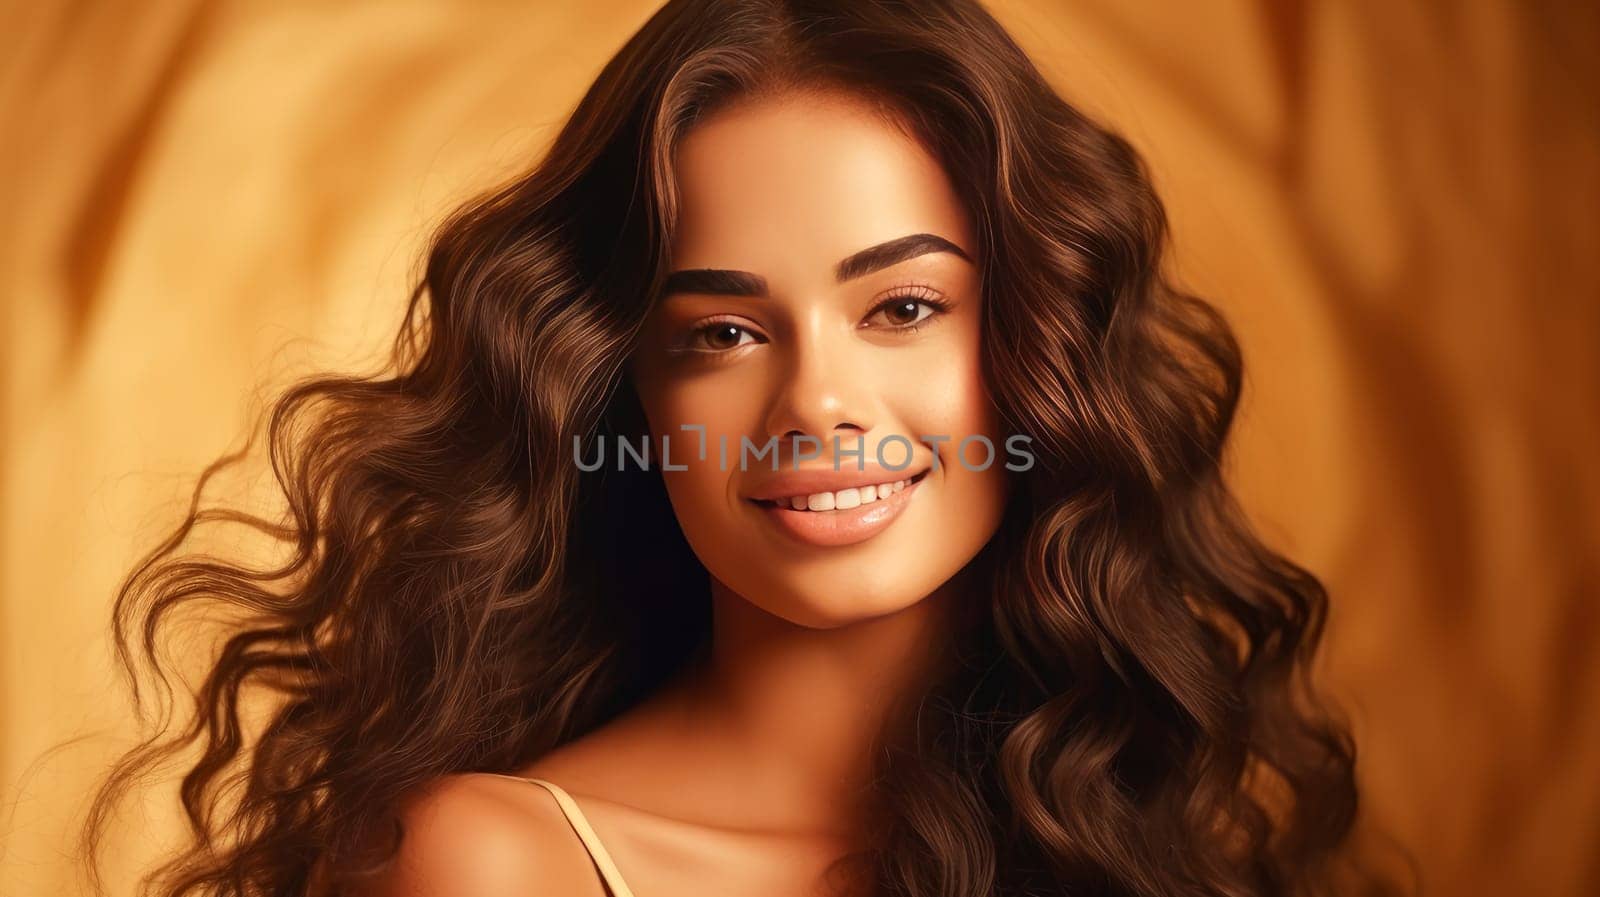 Beautiful, elegant, sexy Latino, Spain woman with long hair with perfect skin, golden background, banner. Advertising of cosmetic products, spa treatments, shampoos and hair care products, dentistry and medicine, perfumes and cosmetology for women